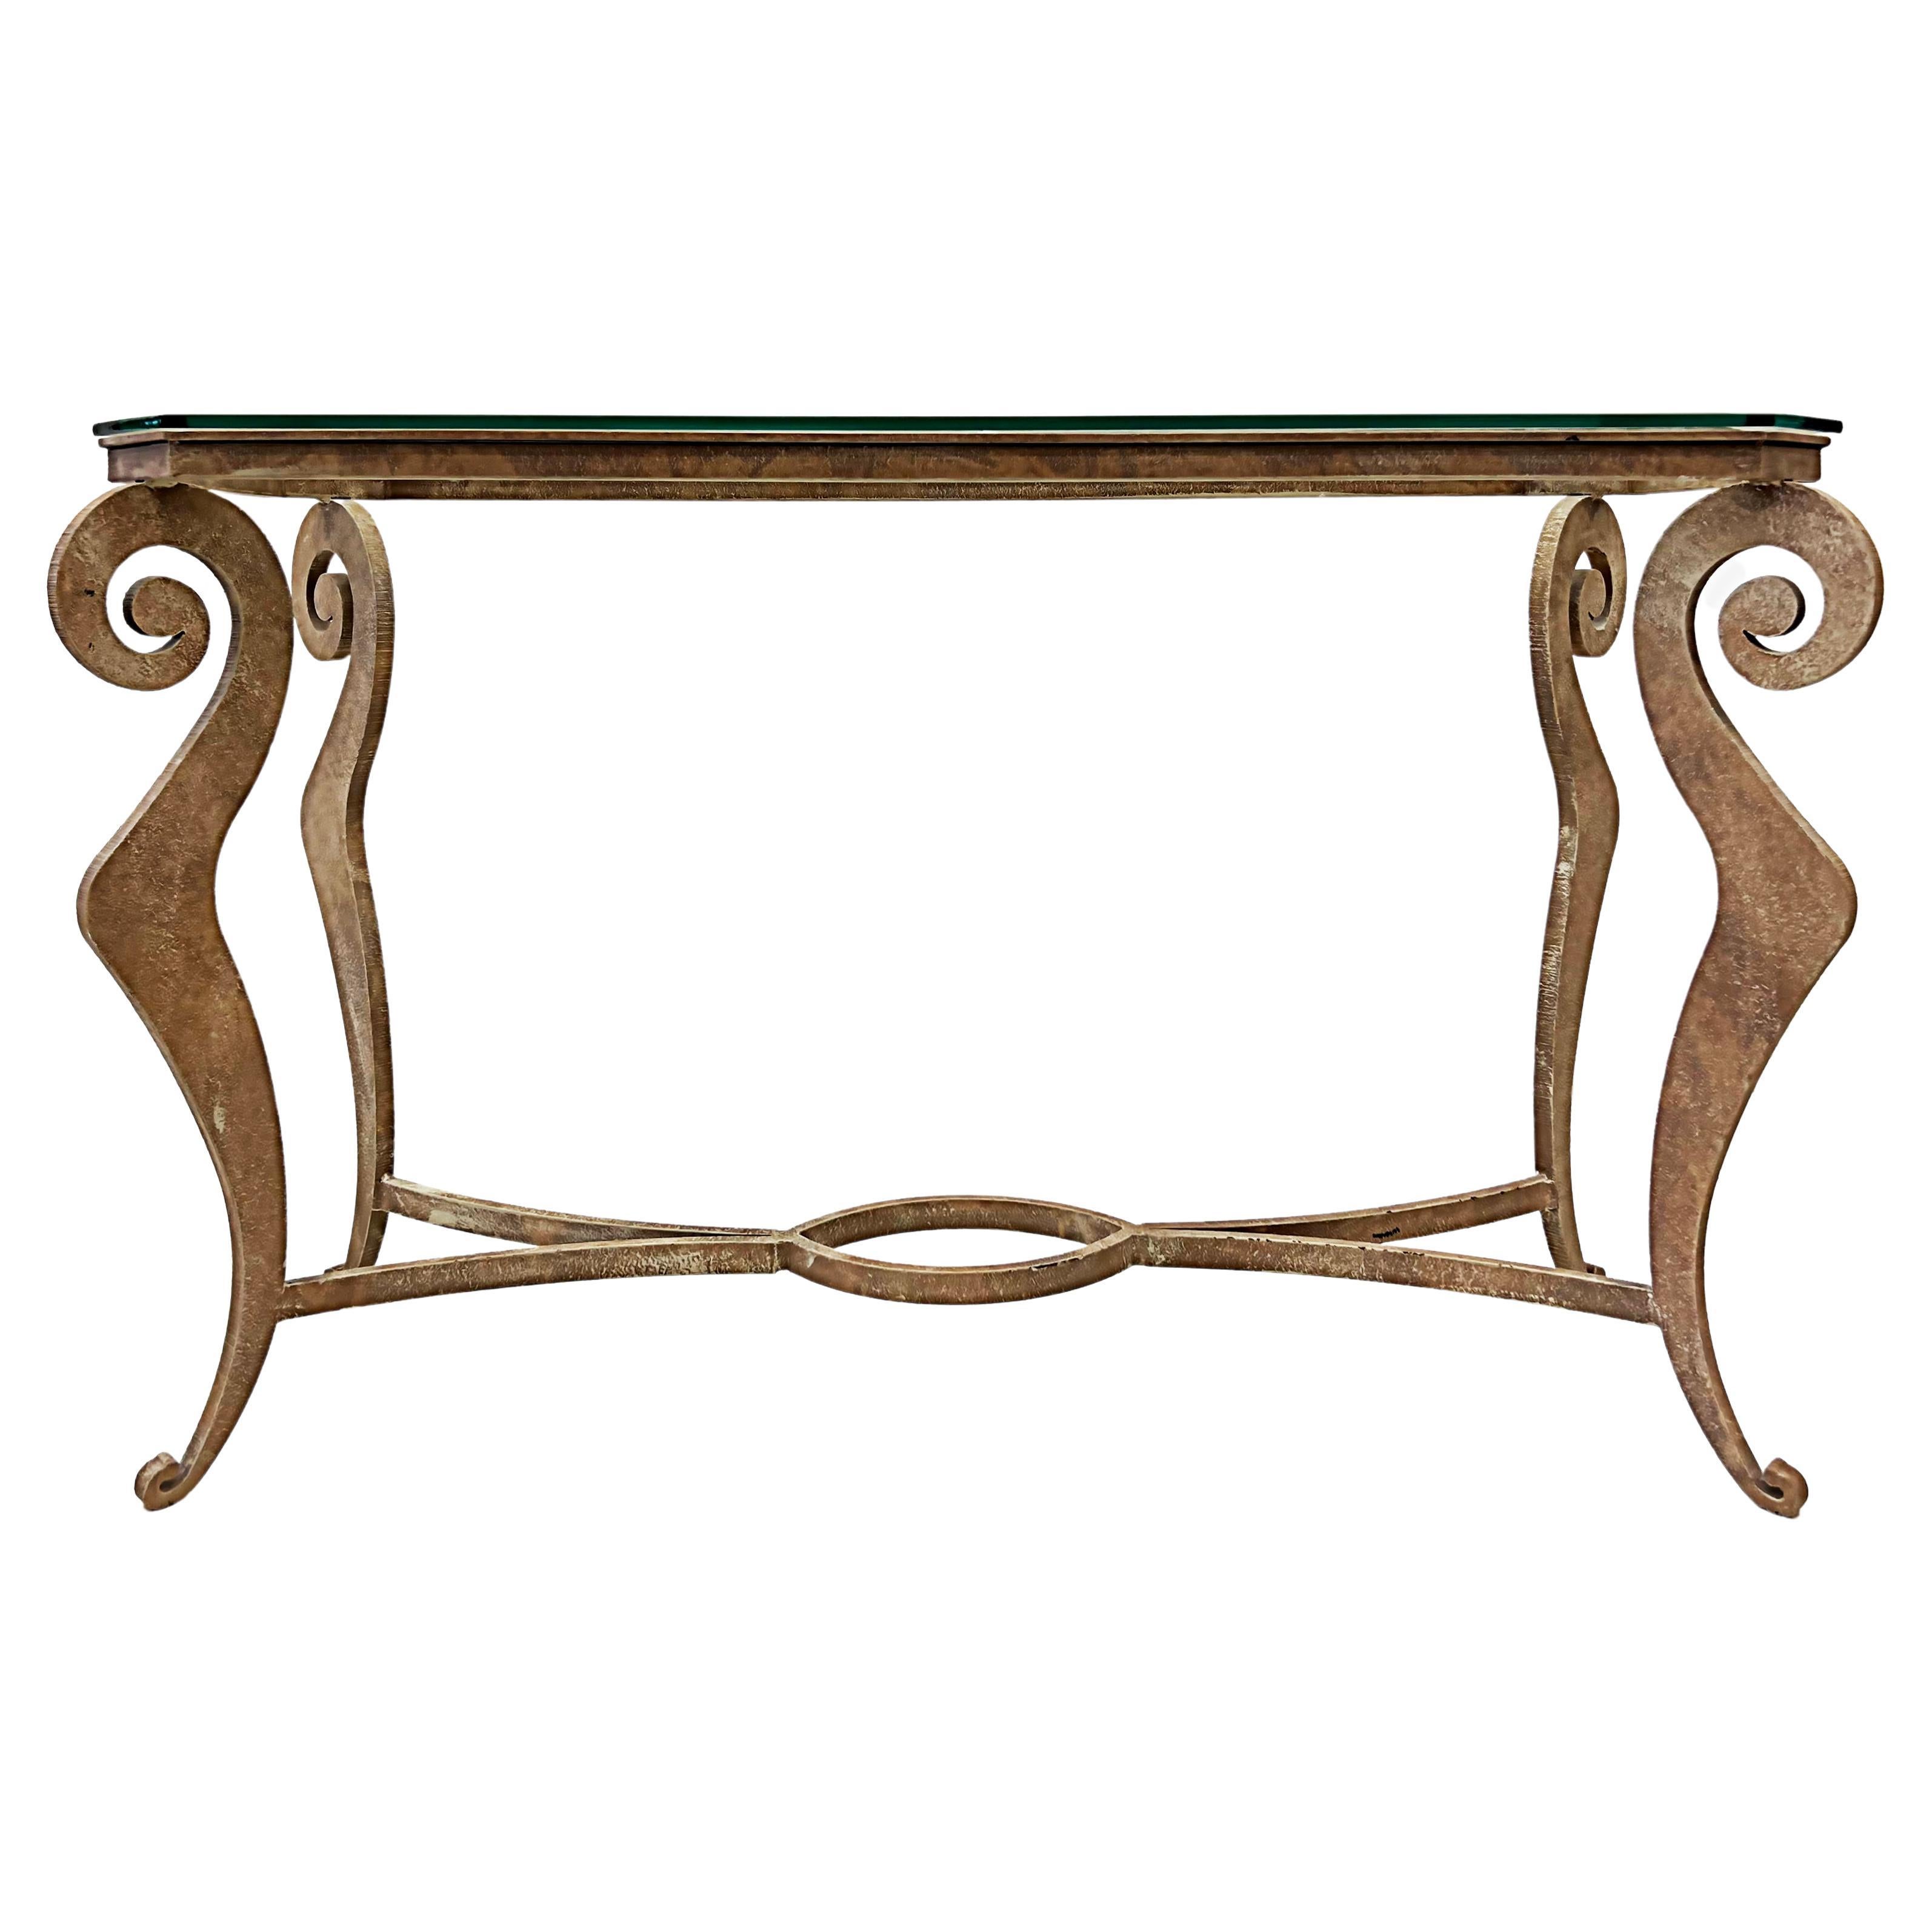 1990s Donghia Style Steel Cut Stylized Console Table with Glass Top